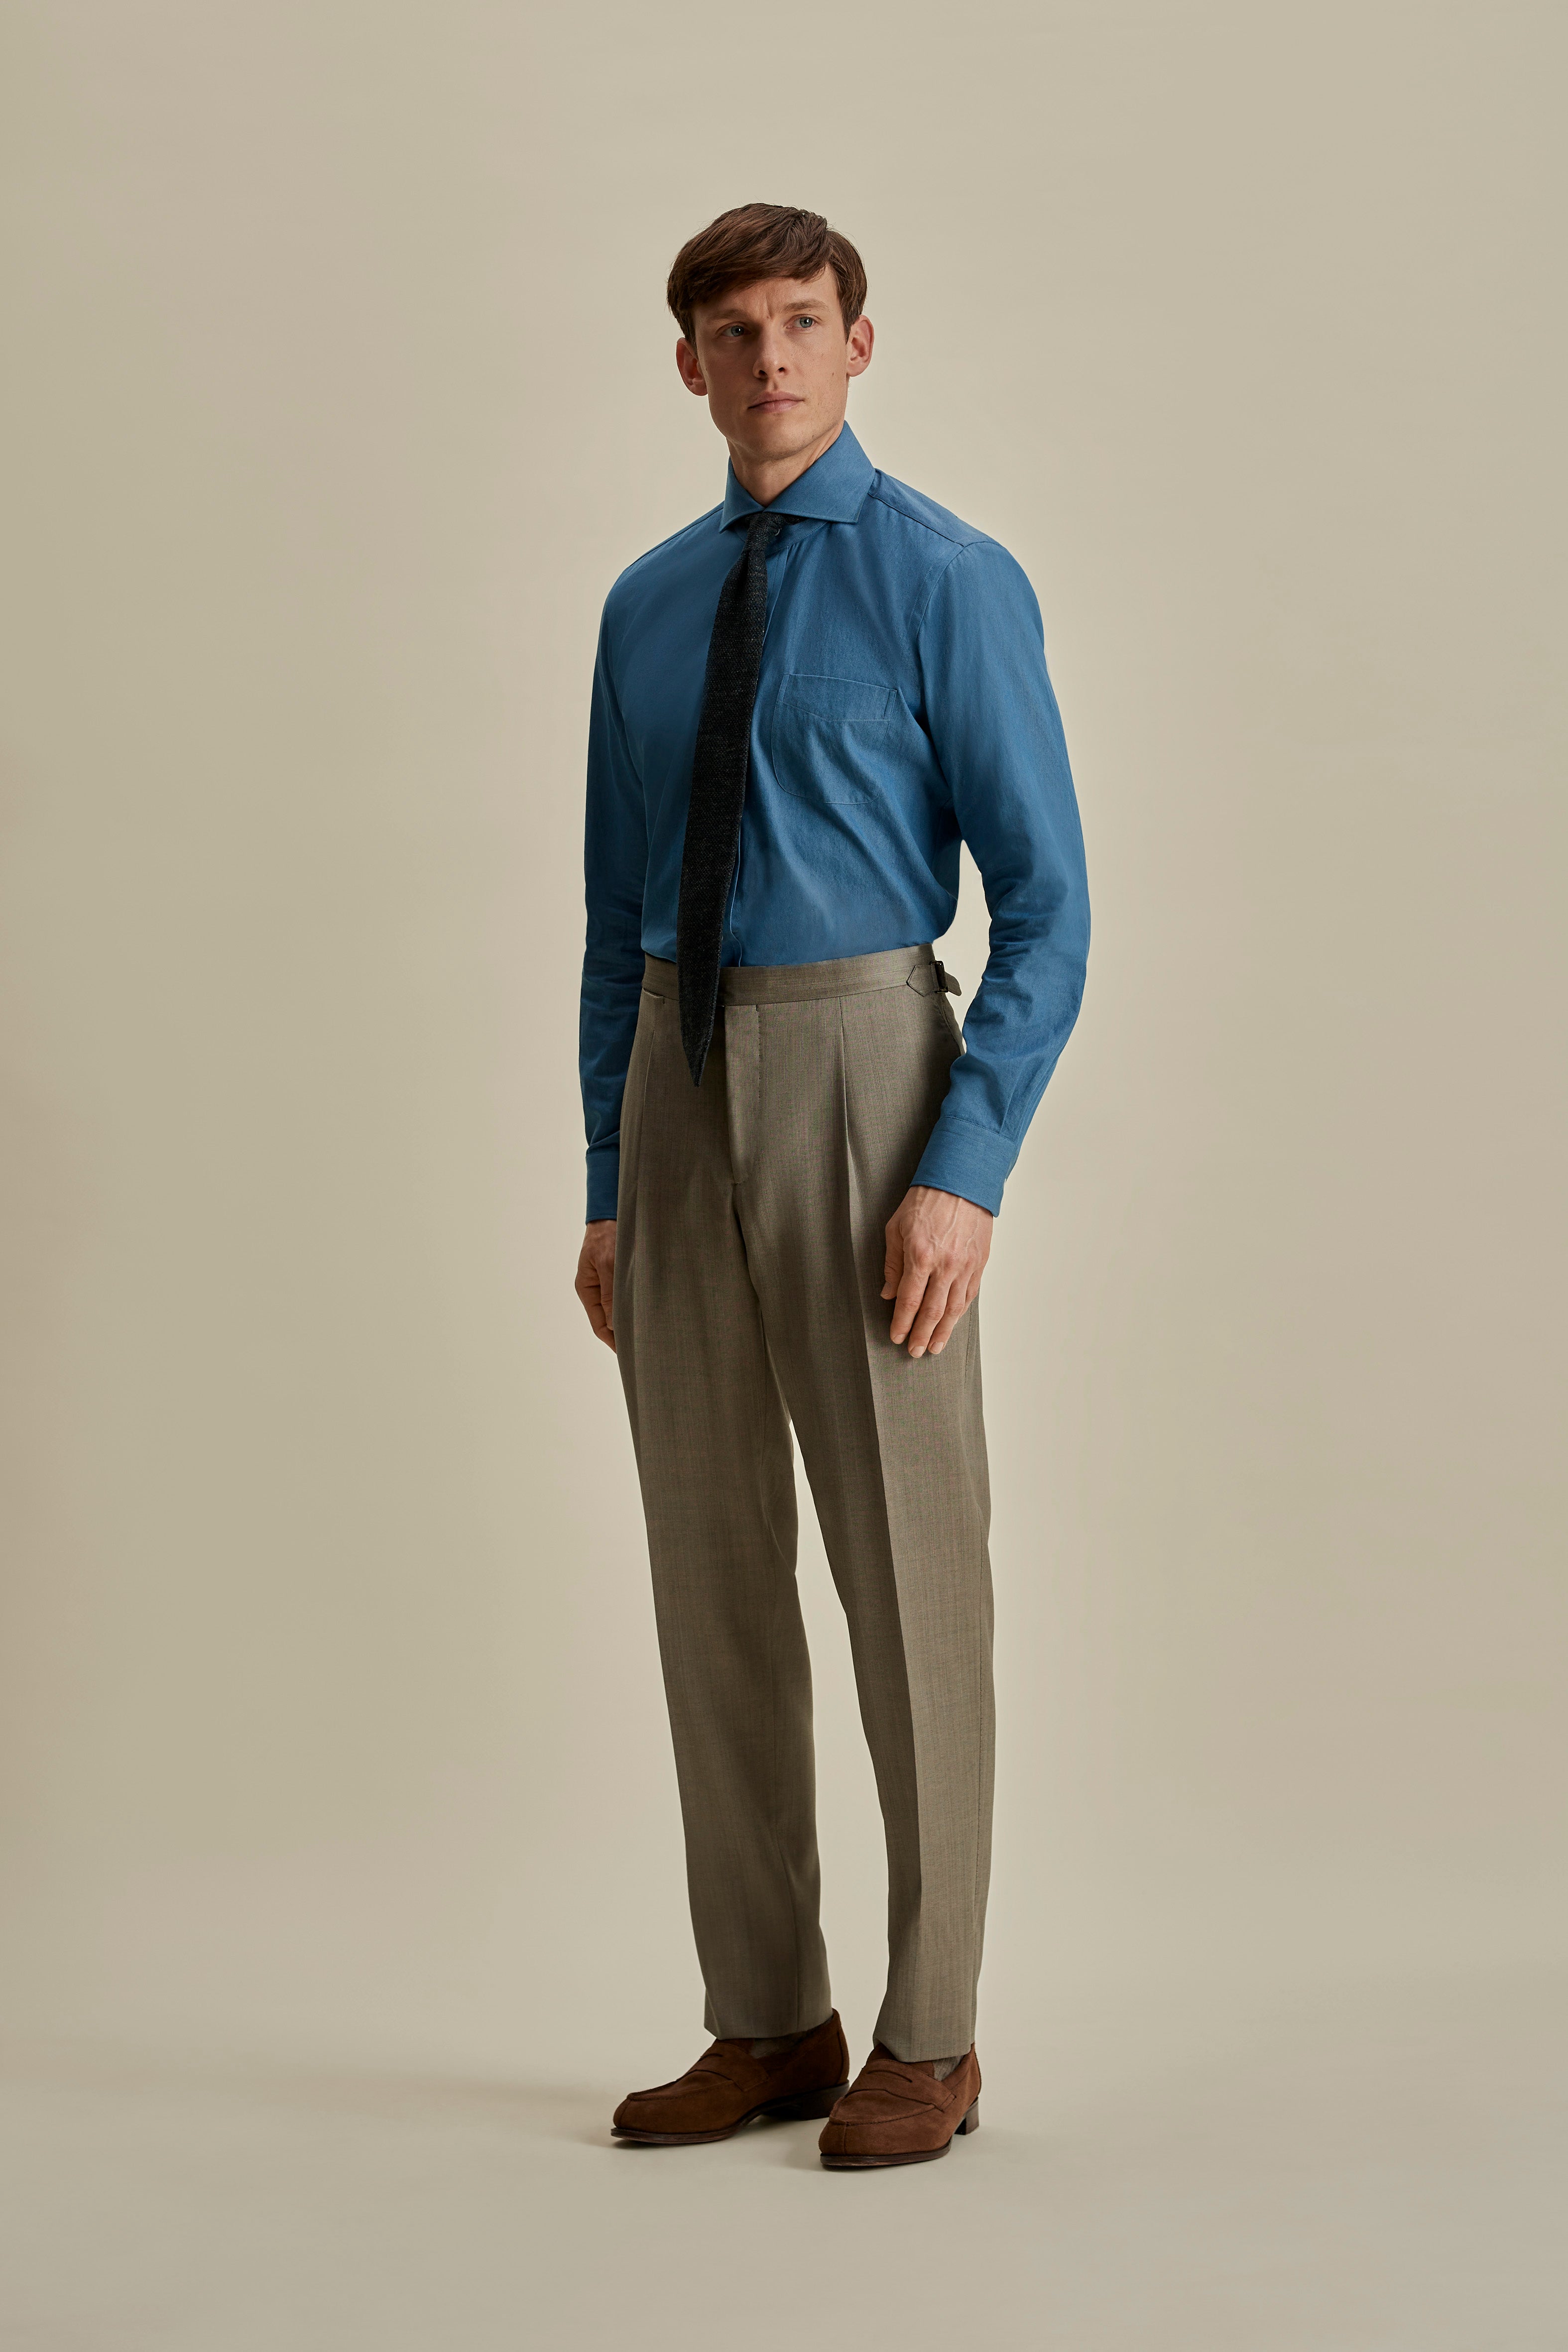 Wool Unstructured Single Breasted Suit Taupe Full Length Trousers Model Image